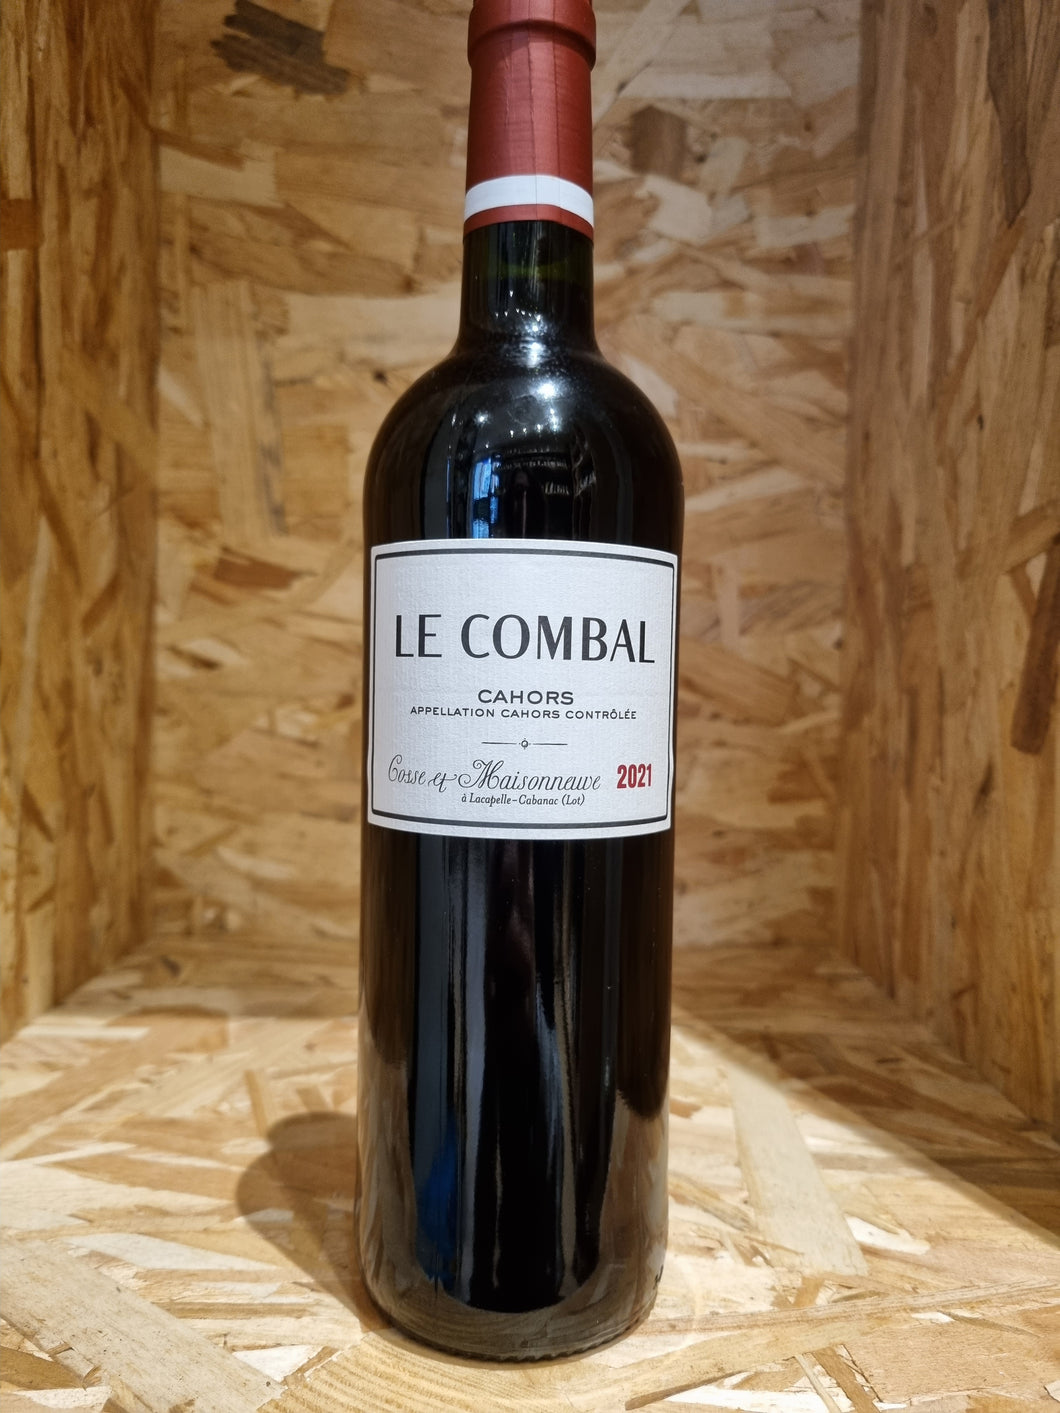 Le Combal Cahors 2021 - 75cl